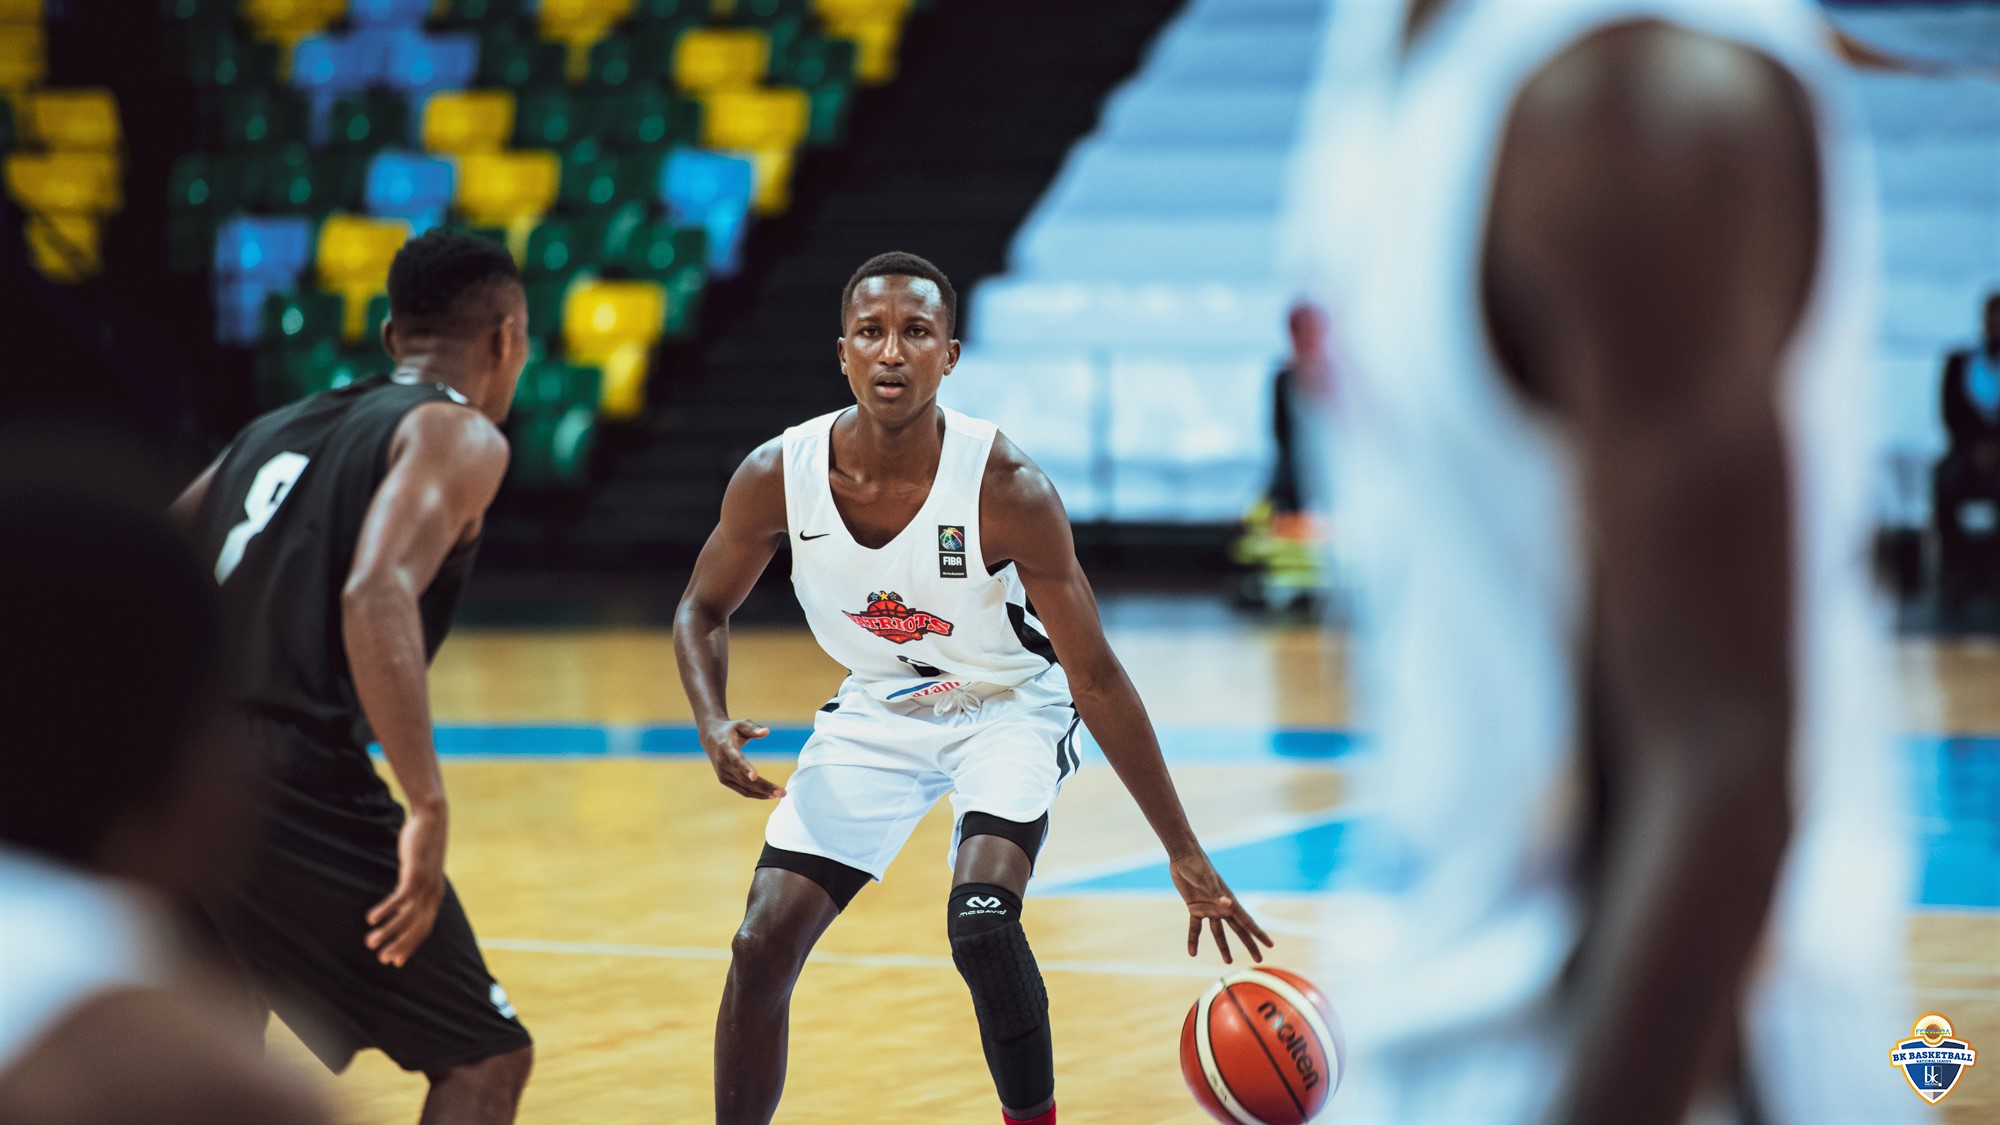 Star guard Guibert Nijimbere, who is averaging a 56 field goal percentage, scored a game-high 19 points as Patriots dominated APR 76-61 on Tuesday to secure a ticket to Friday's semi-finals. /Courtesy photo